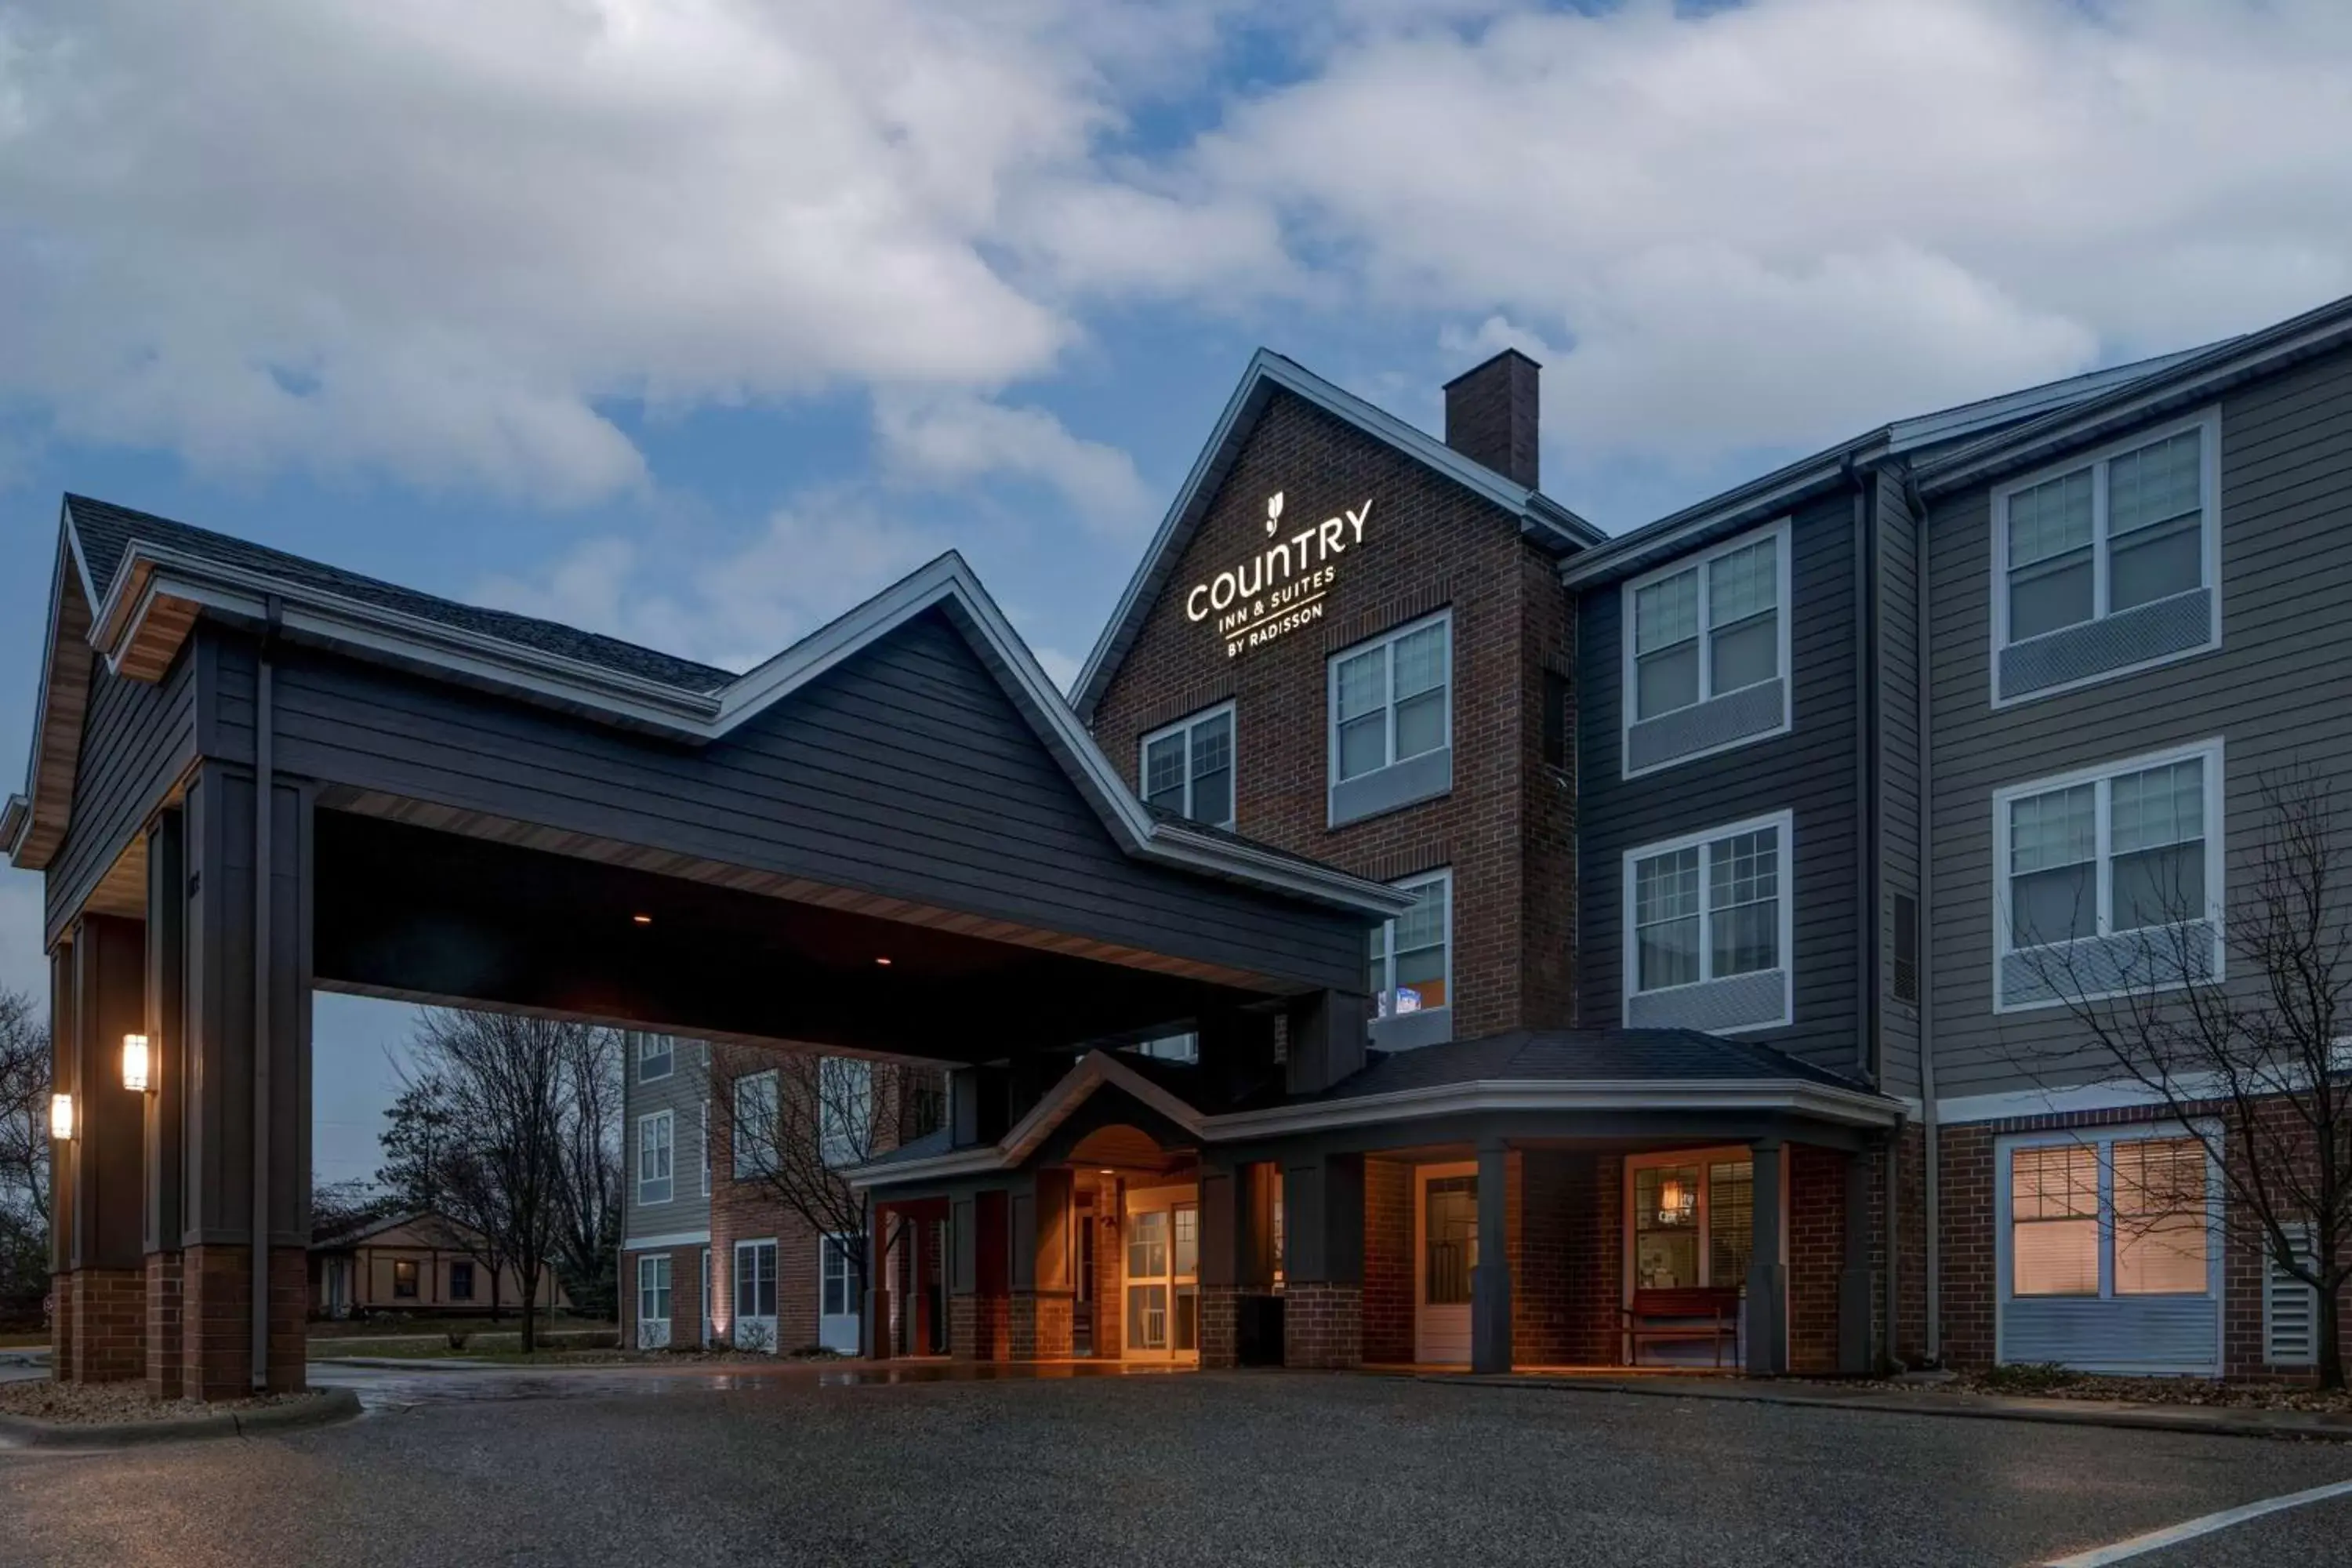 Property building in Country Inn & Suites by Radisson, Red Wing, MN